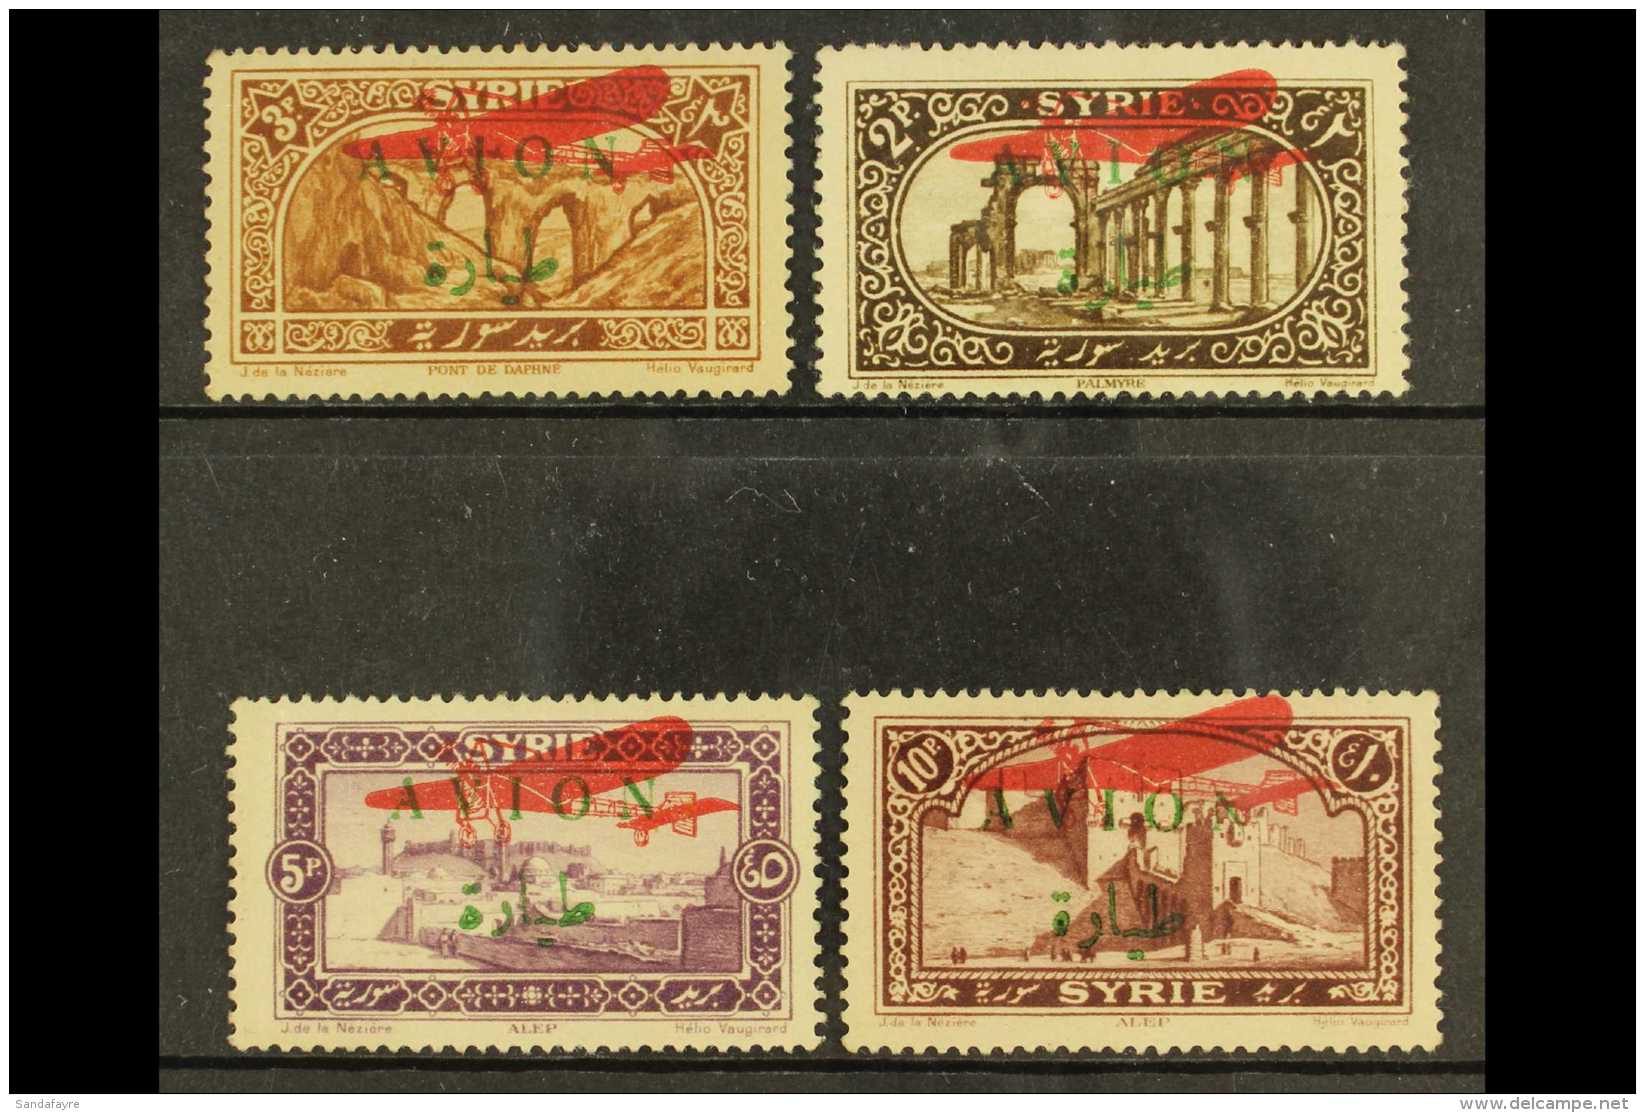 1925 AIRS WITH 1926 OVERPRINTS.  1925 Complete Set With "AVION" Opt In Green, With Additional 1926 Aeroplane Opt... - Syria